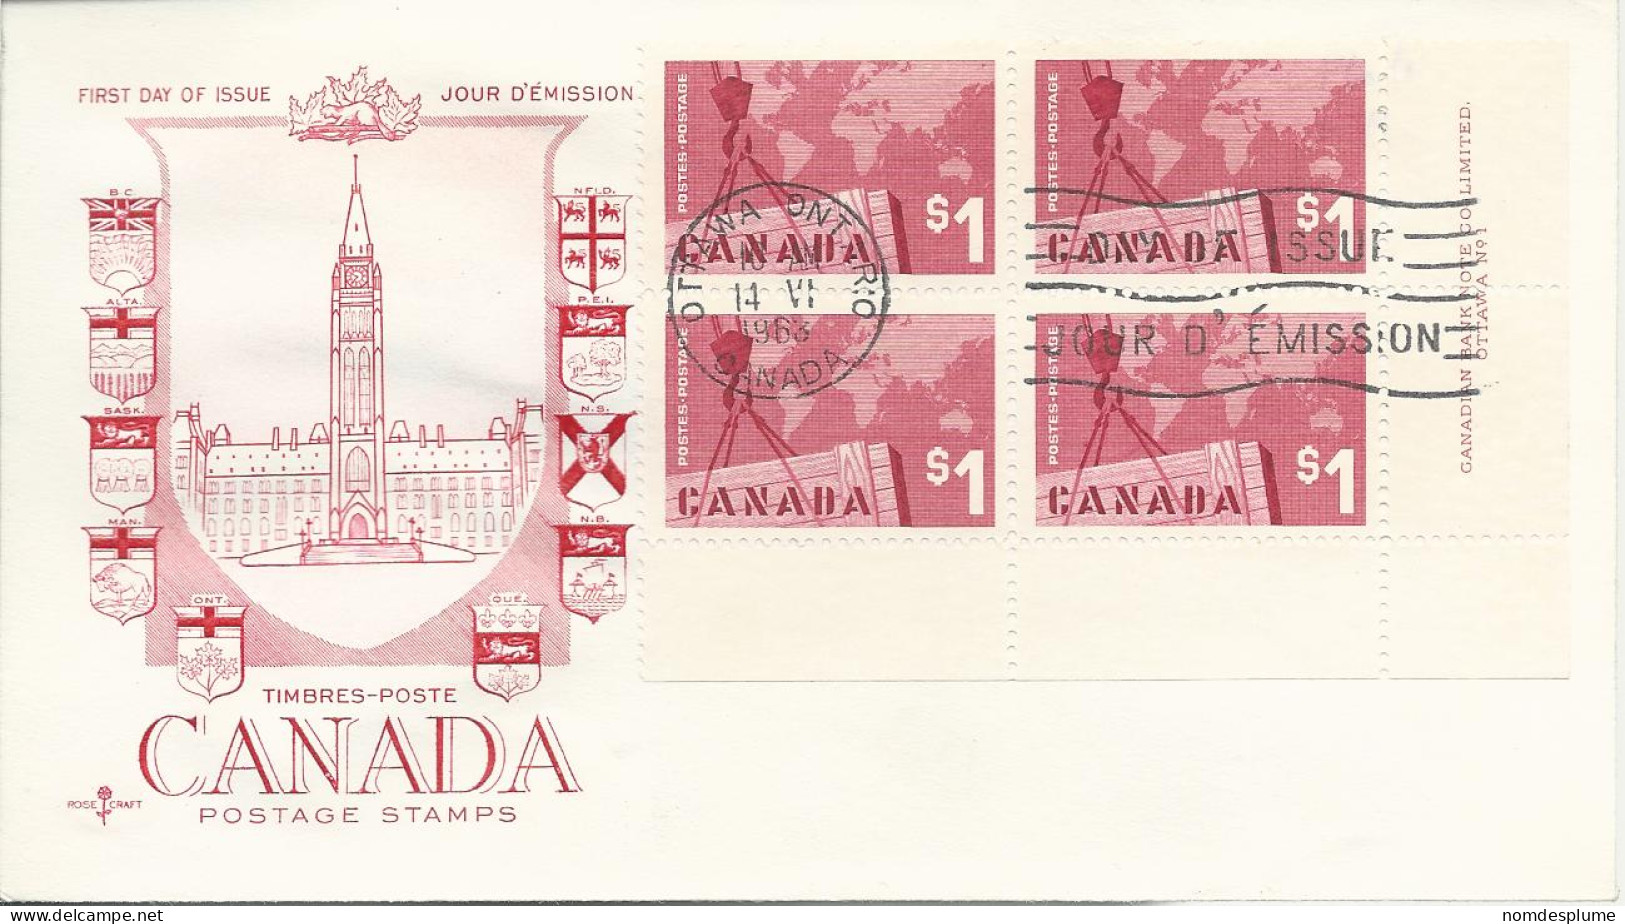 24623) Canada FDC $1 Export Crate Plate Block - Plate Number & Inscriptions